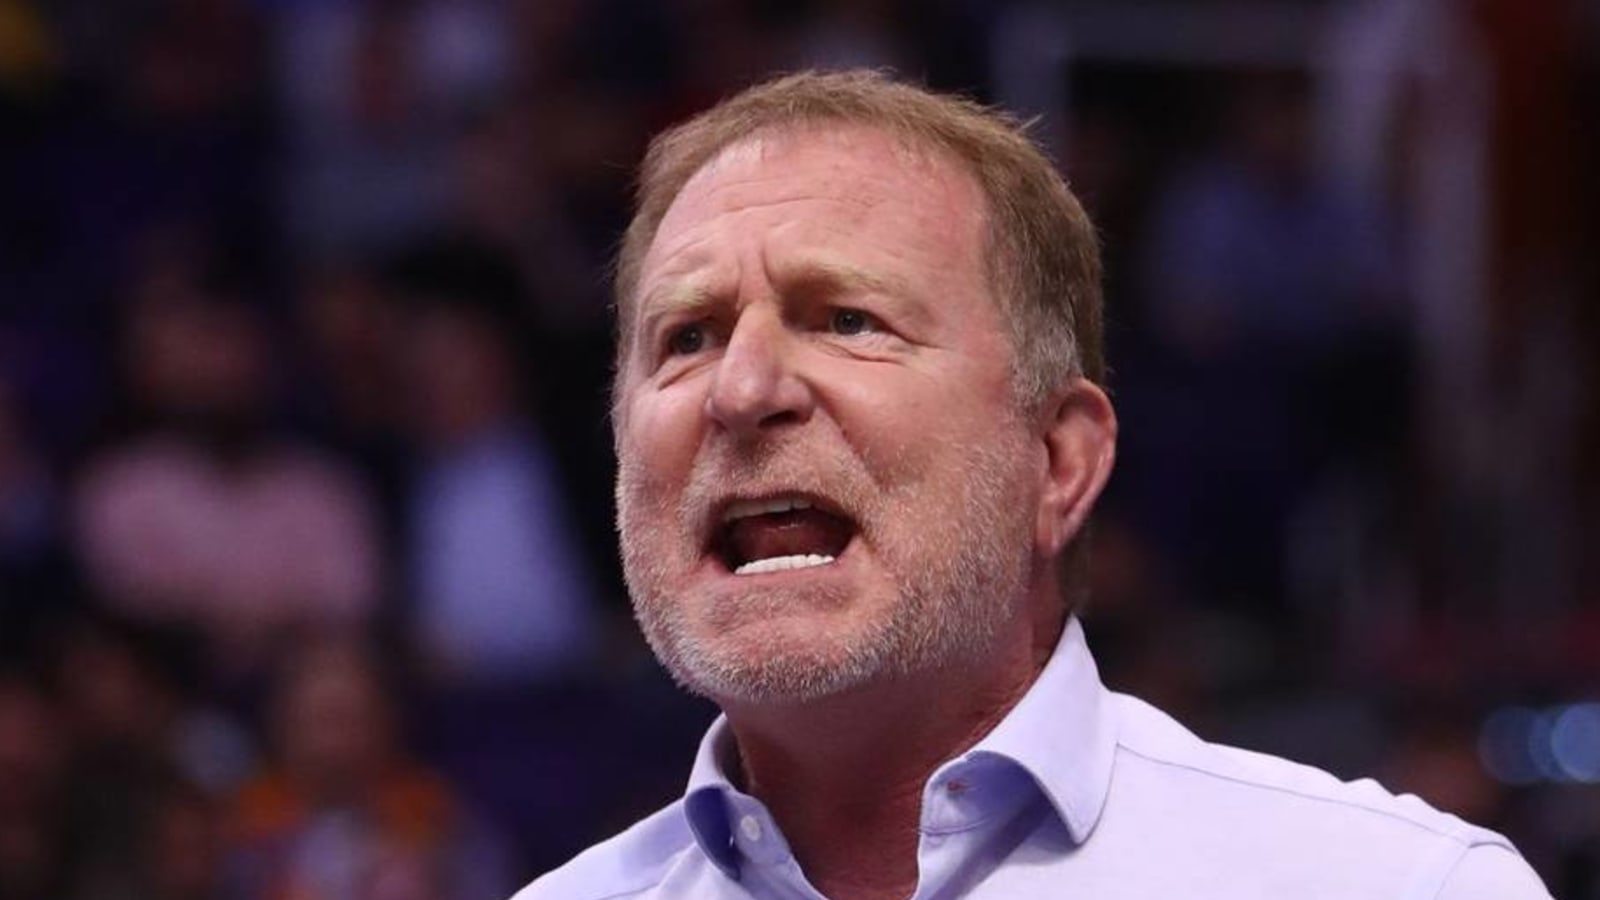 Suns owner Robert Sarver denies accusations of racism, sexism, sexual harassment